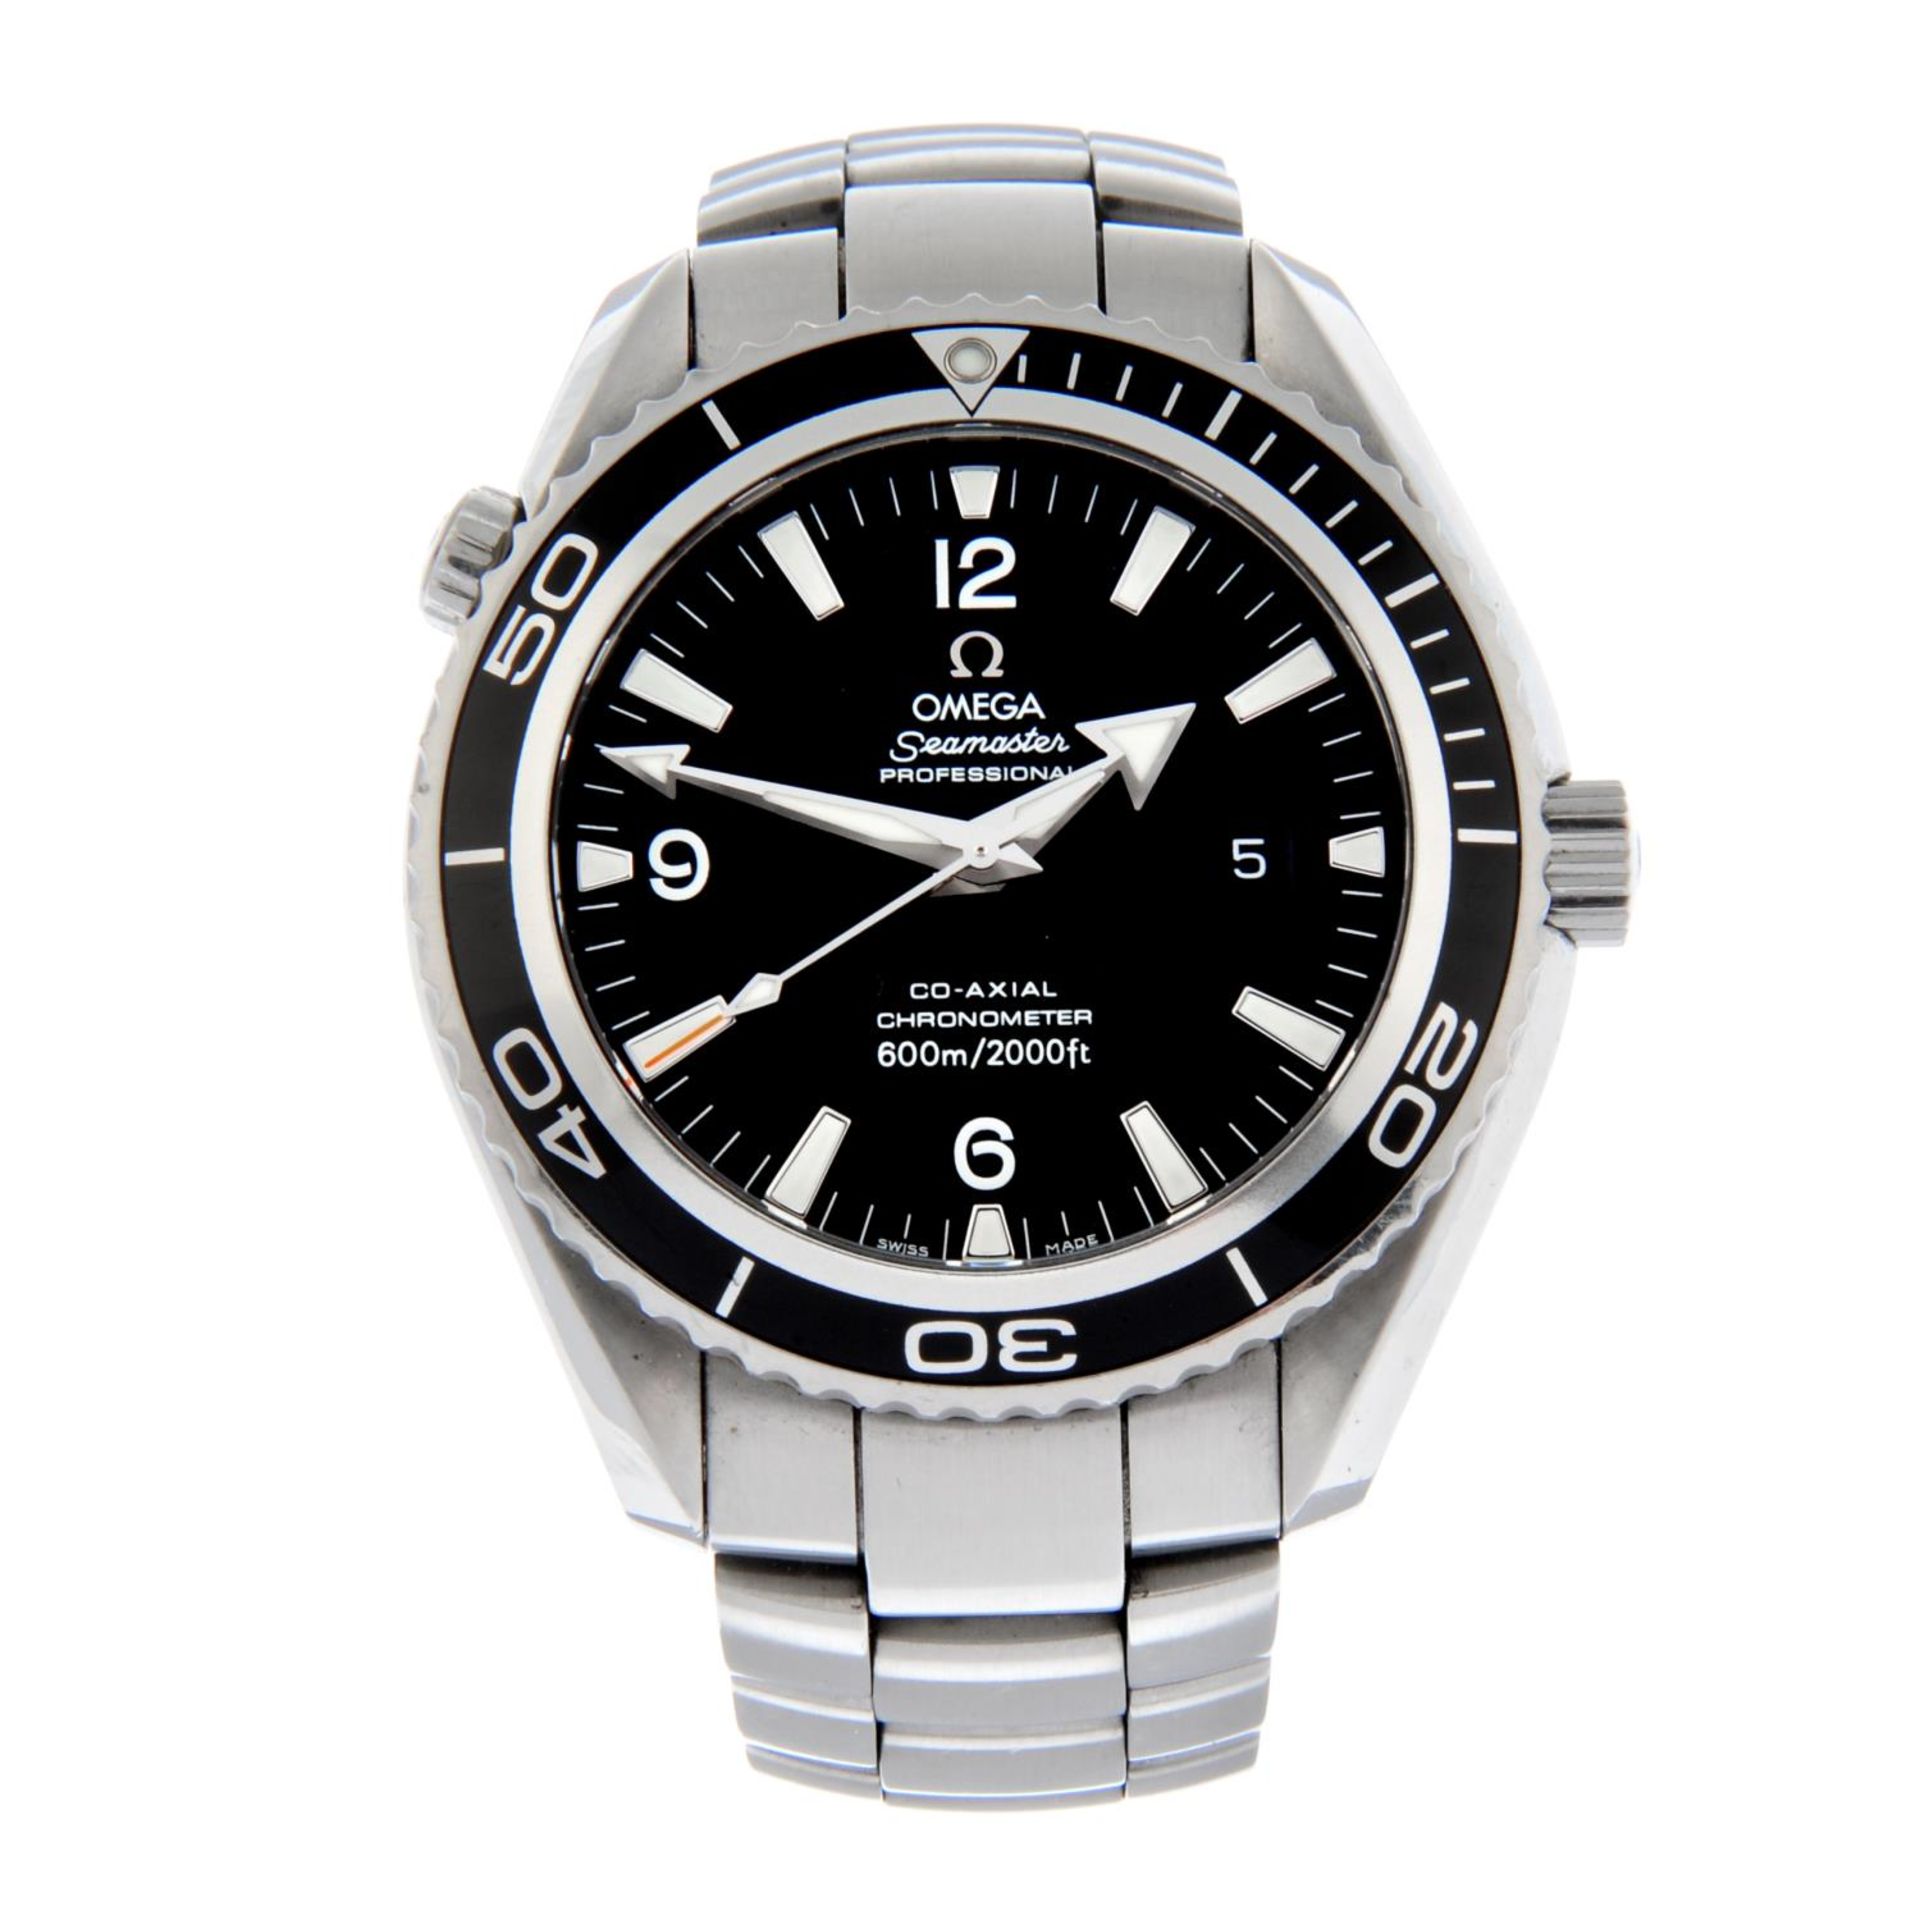 OMEGA - a limited edition SAS Seamaster Professional Planet Ocean Co-Axial chronometer bracelet